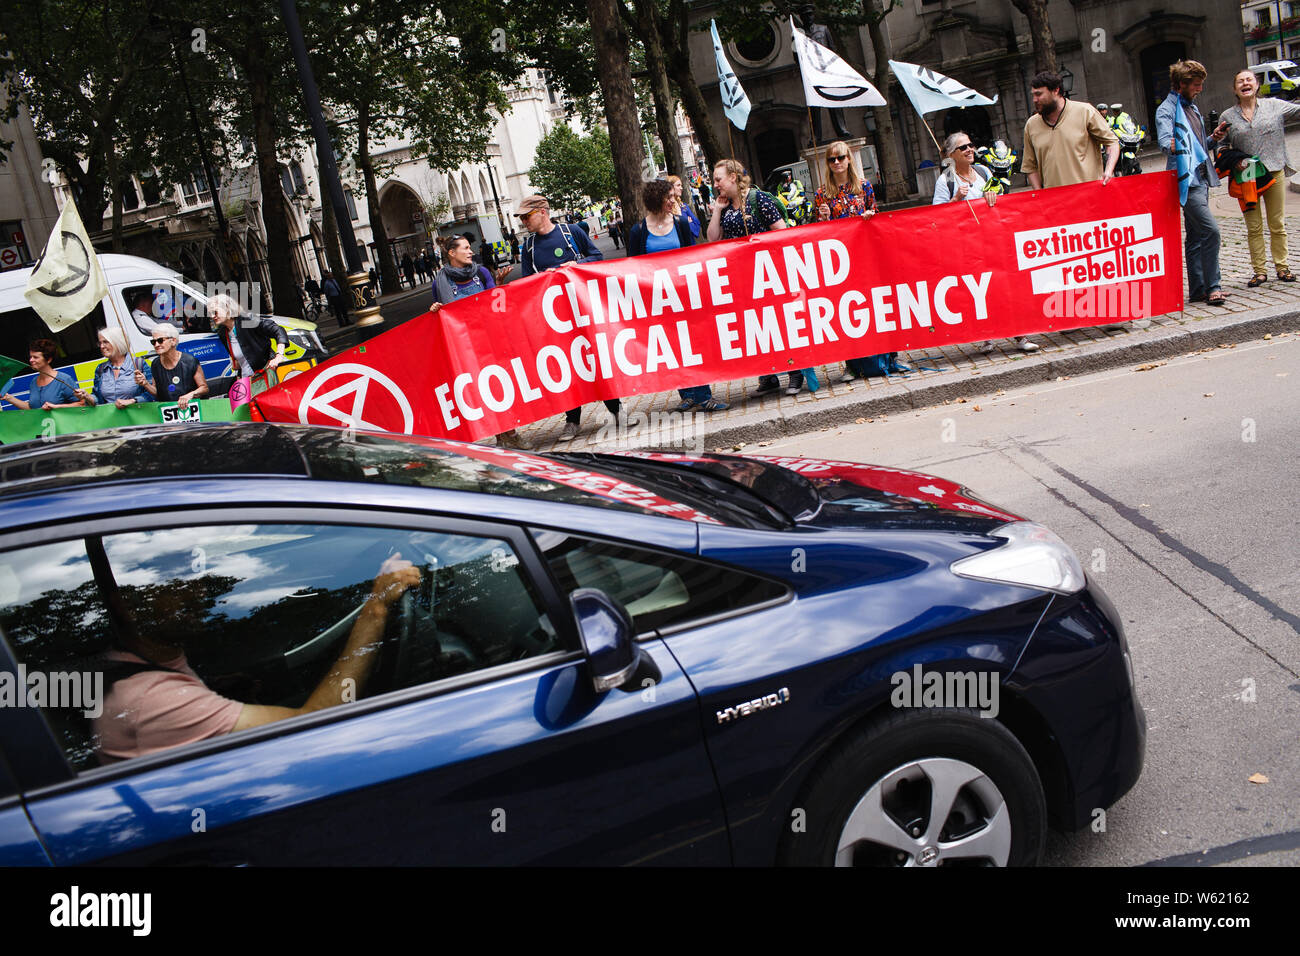 July 15, 2019, London, United Kingdom: Members and supporters of climate change activist group Extinction Rebellion hold a banner at Aldwych on the opening day of the group's 'Summer Uprising' demonstration outside the Royal Courts of Justice in London. Demonstrations were also held in Bristol, Cardiff, Leeds and Glasgow. Among their demands for greater action on climate change, protesters are calling for 'ecocide' (i.e. the destruction of ecosystems) to be made a criminal act. The centrepiece of the London protest, a blue boat, the 'Polly Higgins', is named after the late environmental lawyer Stock Photo